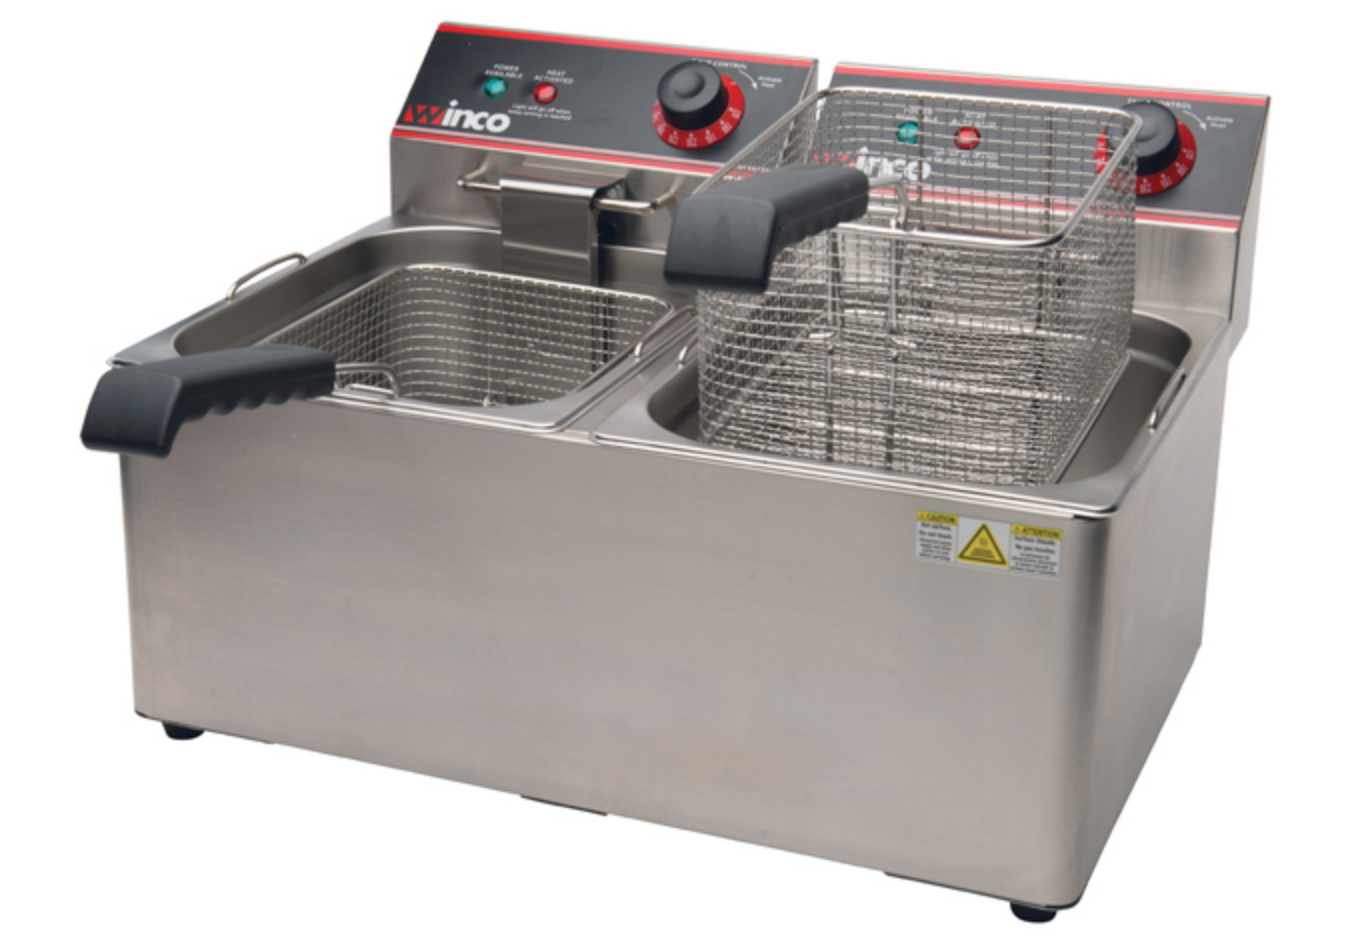 Winco EFT-32 Electric Counter Top Double Well Deep Fryer - 120V